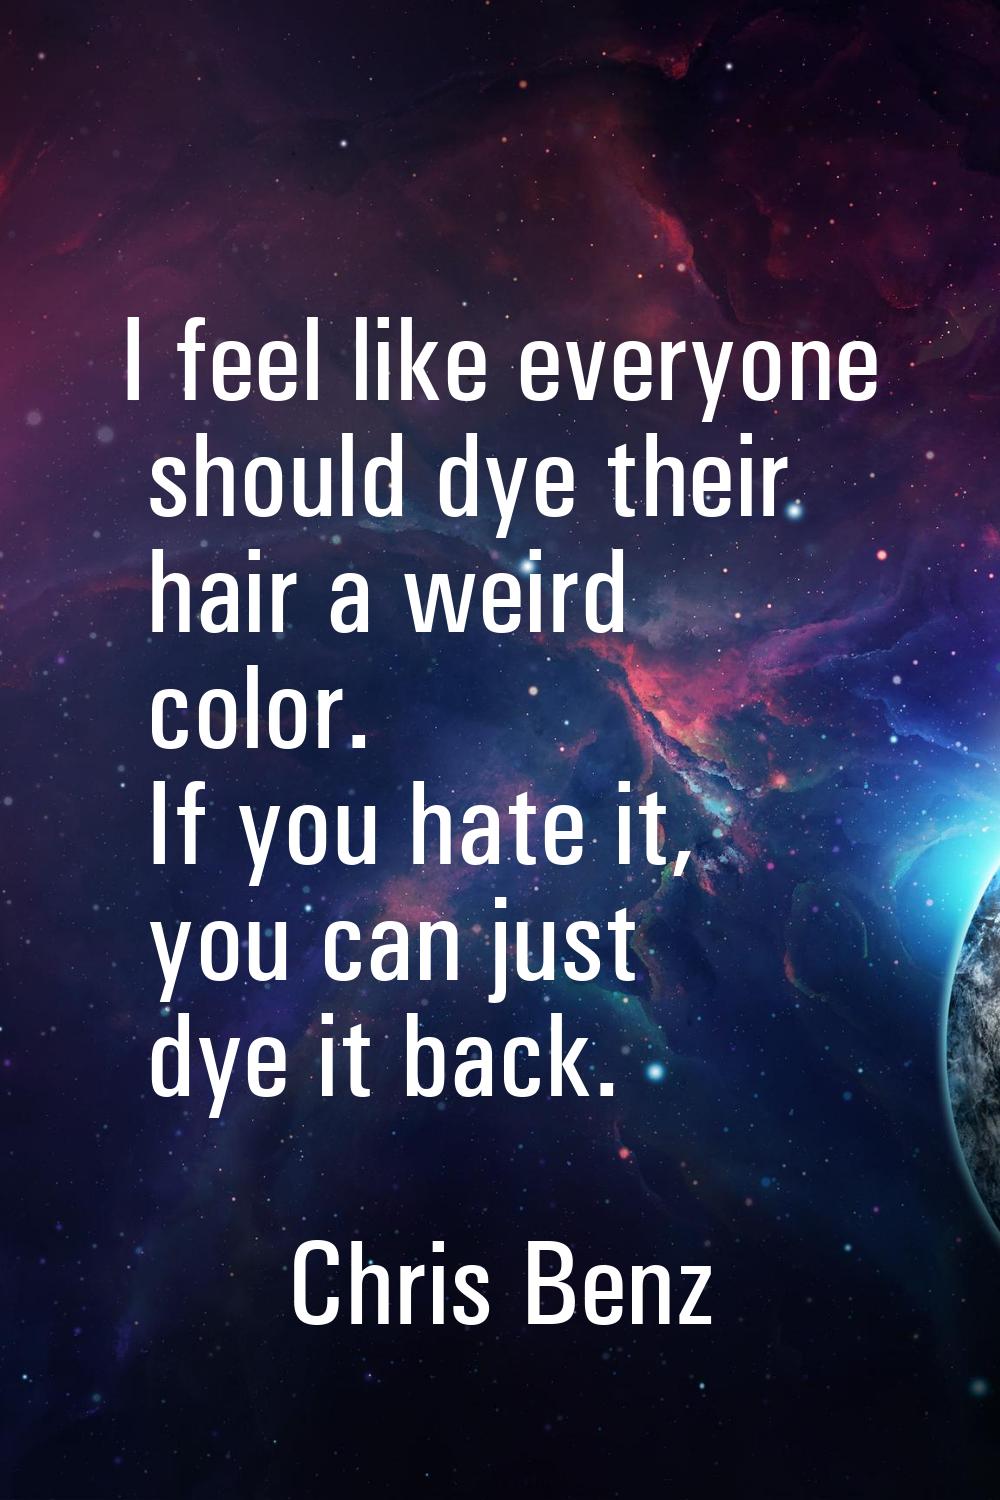 I feel like everyone should dye their hair a weird color. If you hate it, you can just dye it back.